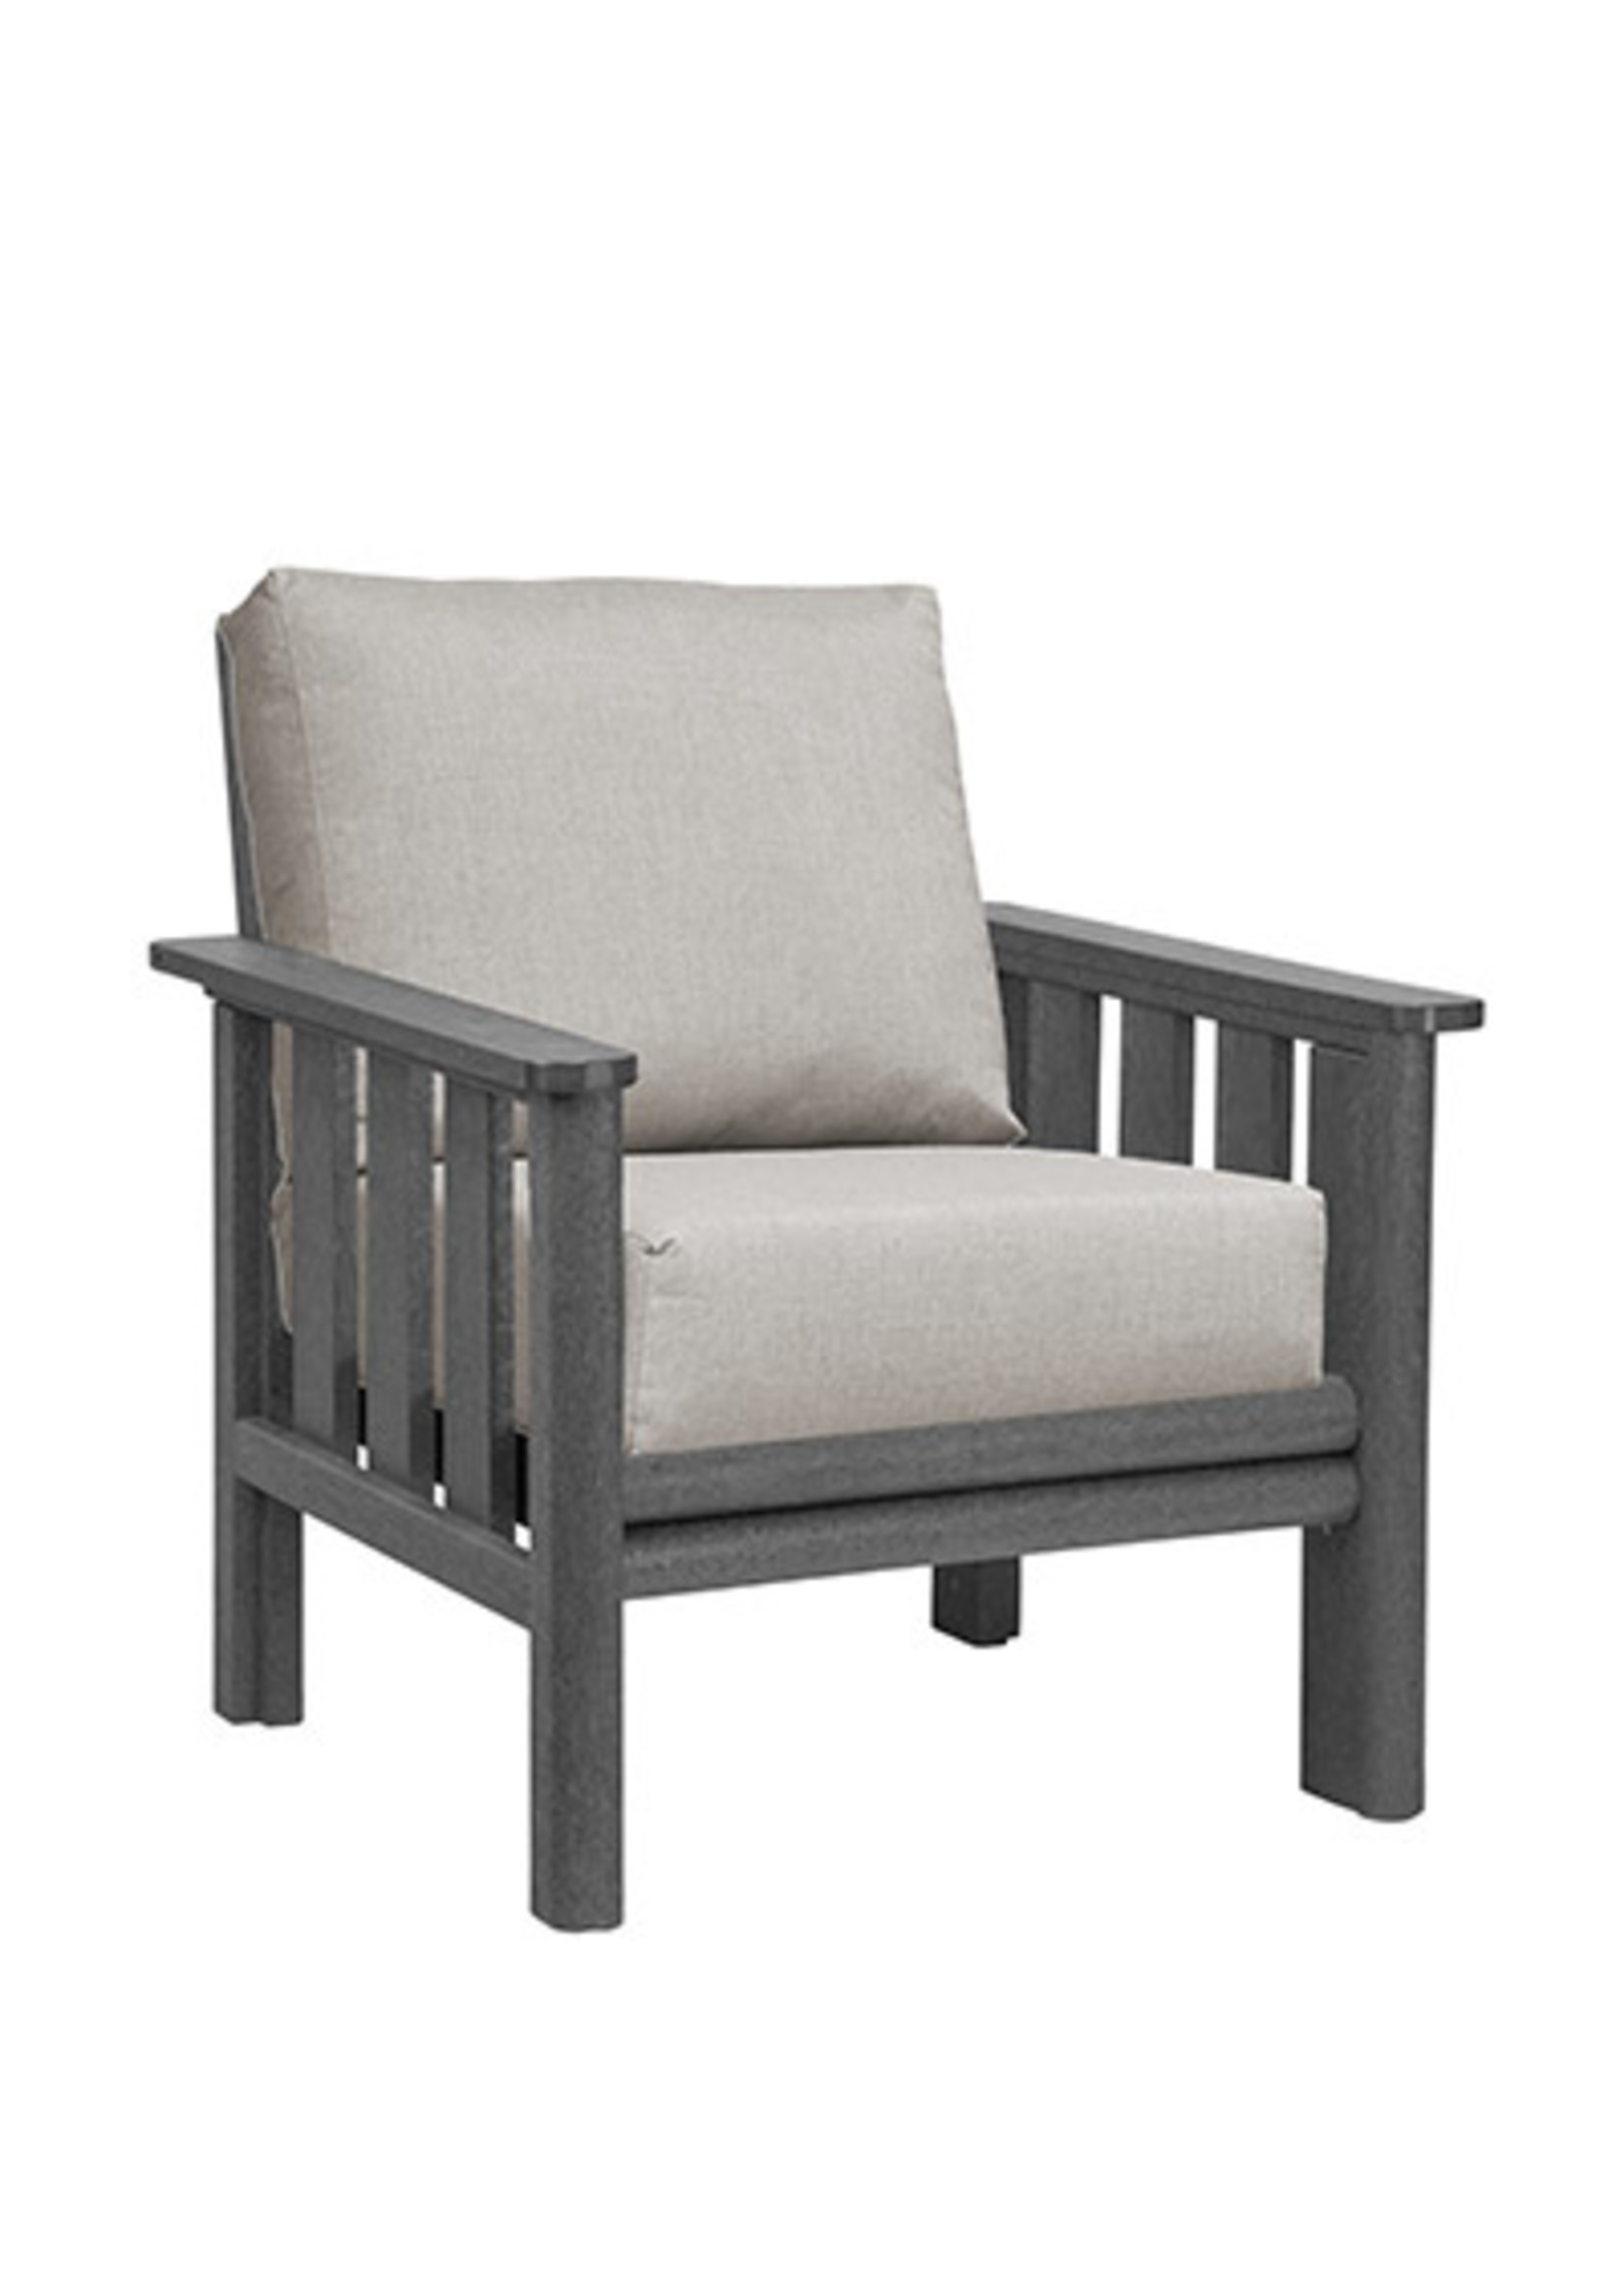 C.R. Plastic Products DSF261 * Stratford Armchair